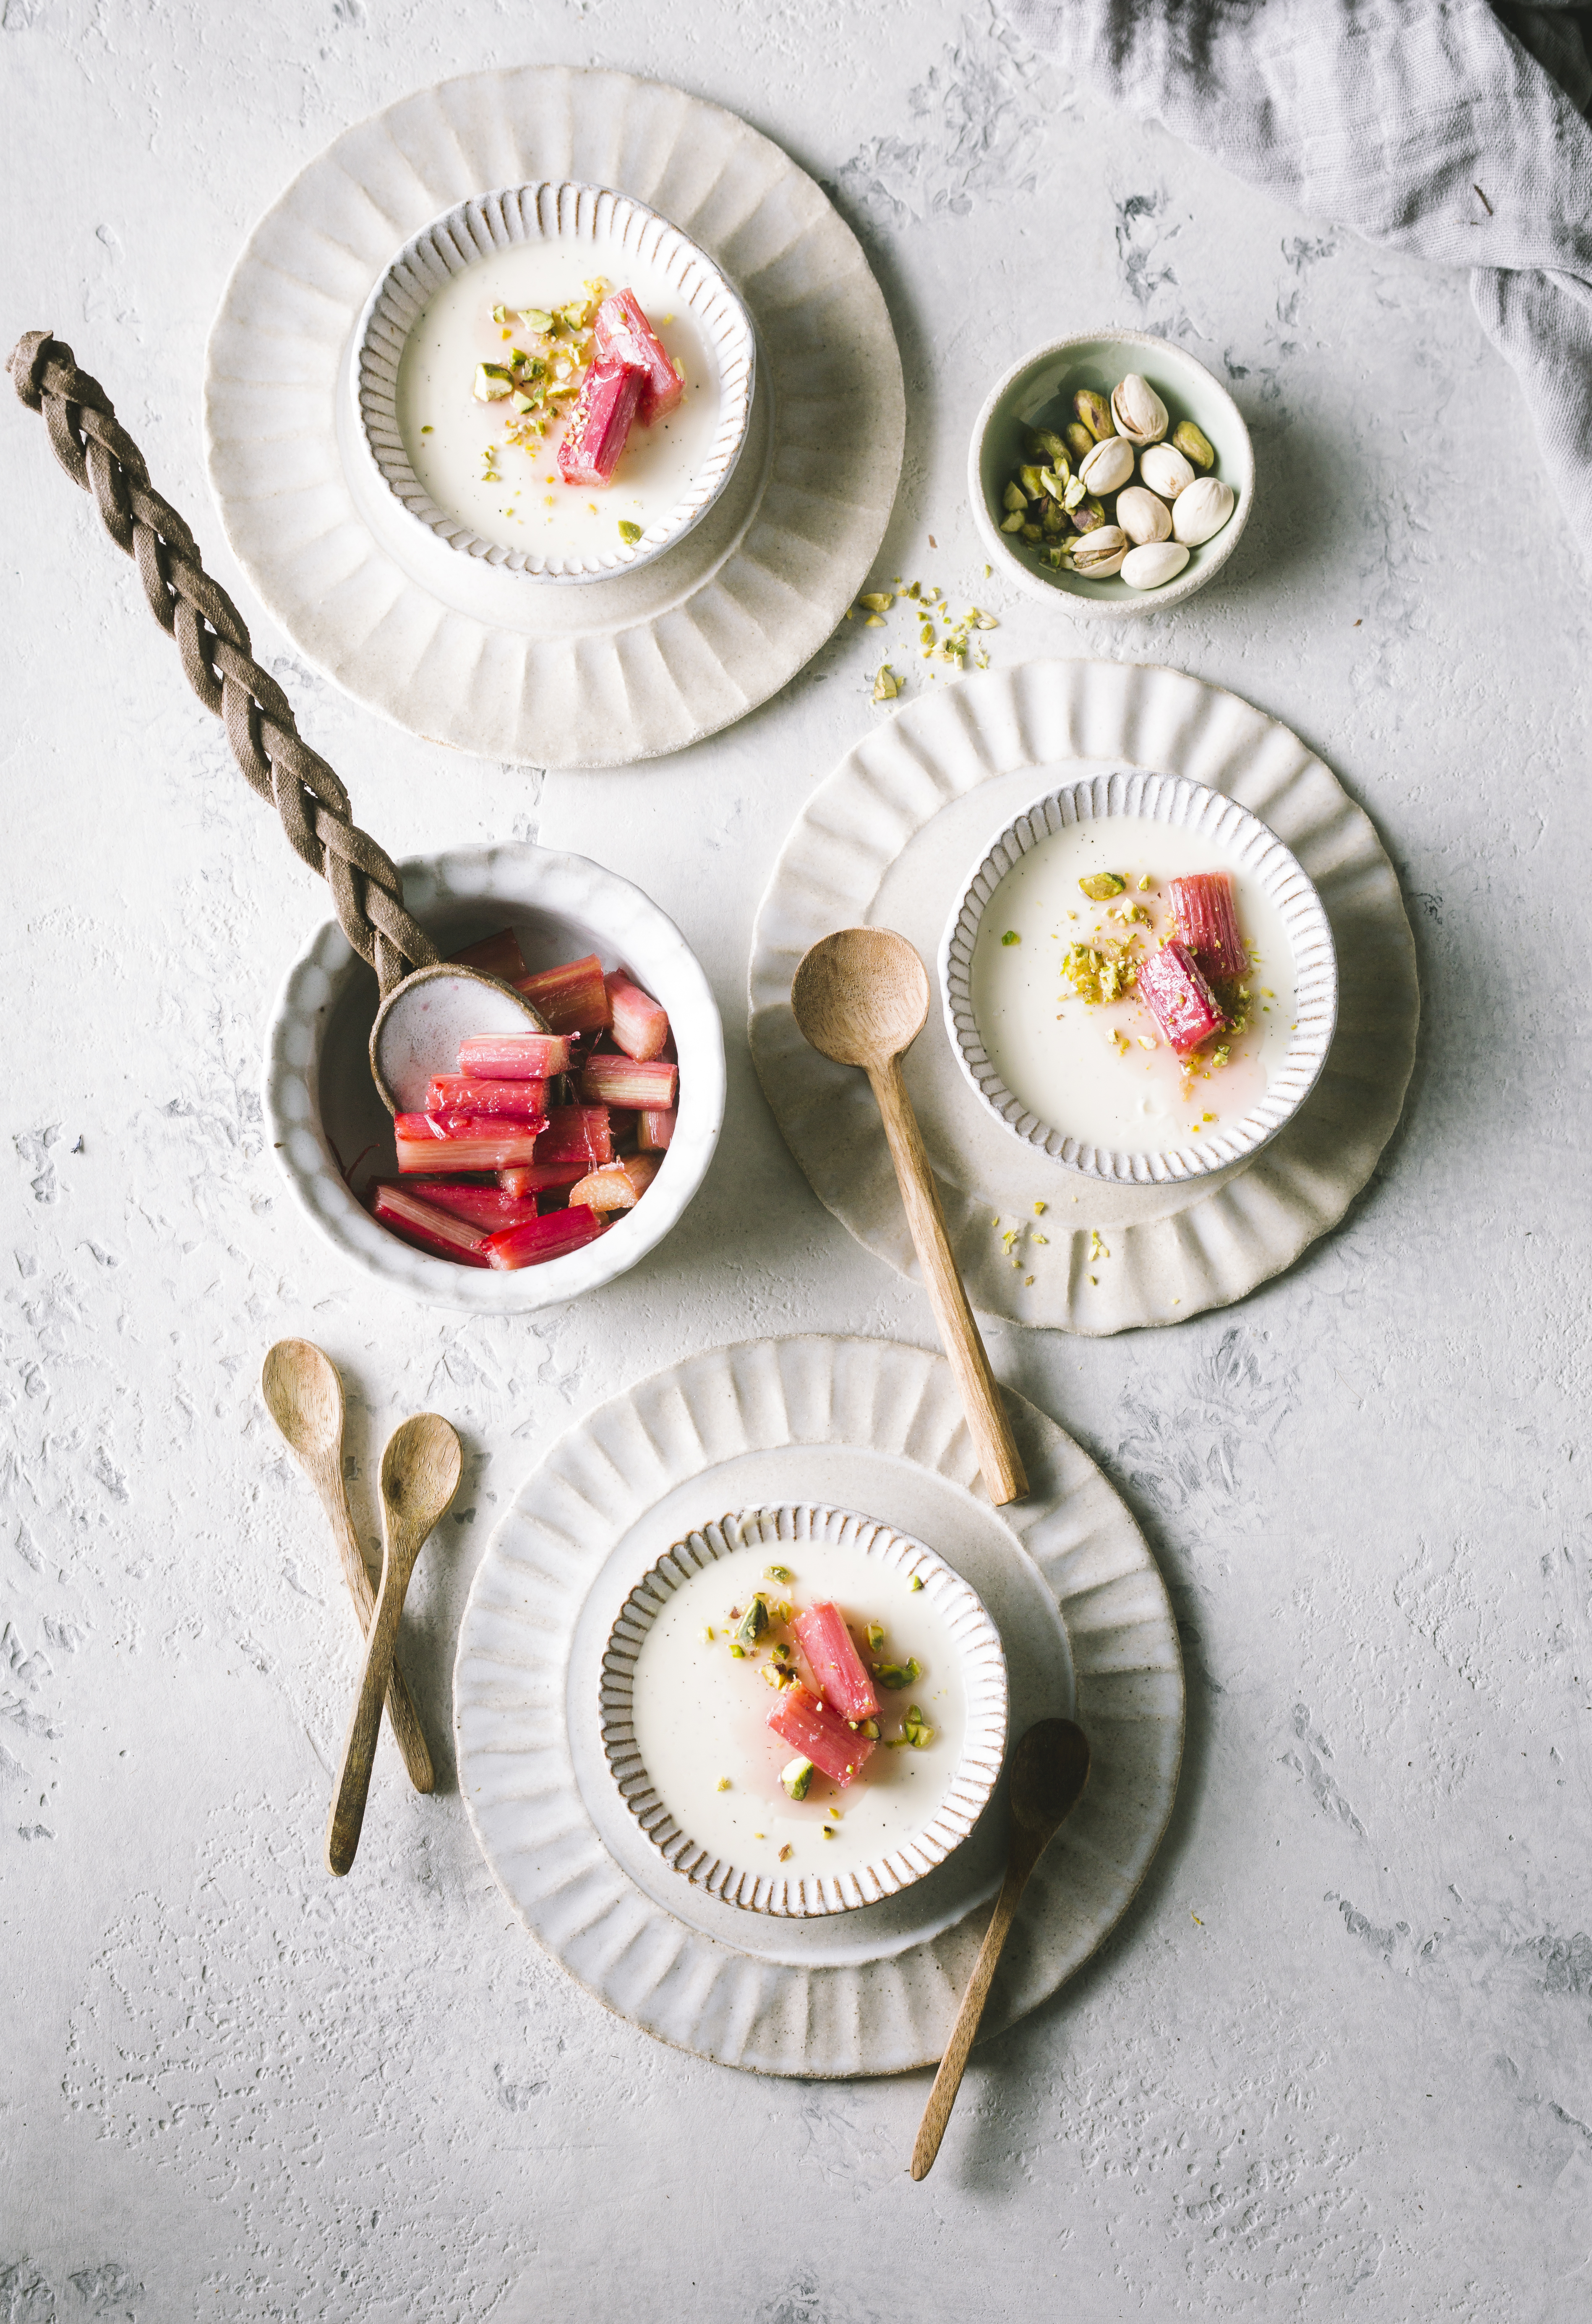 VANILLA PANNACOTTA WITH ROASTED RHUBARB AND PISTACHIOS